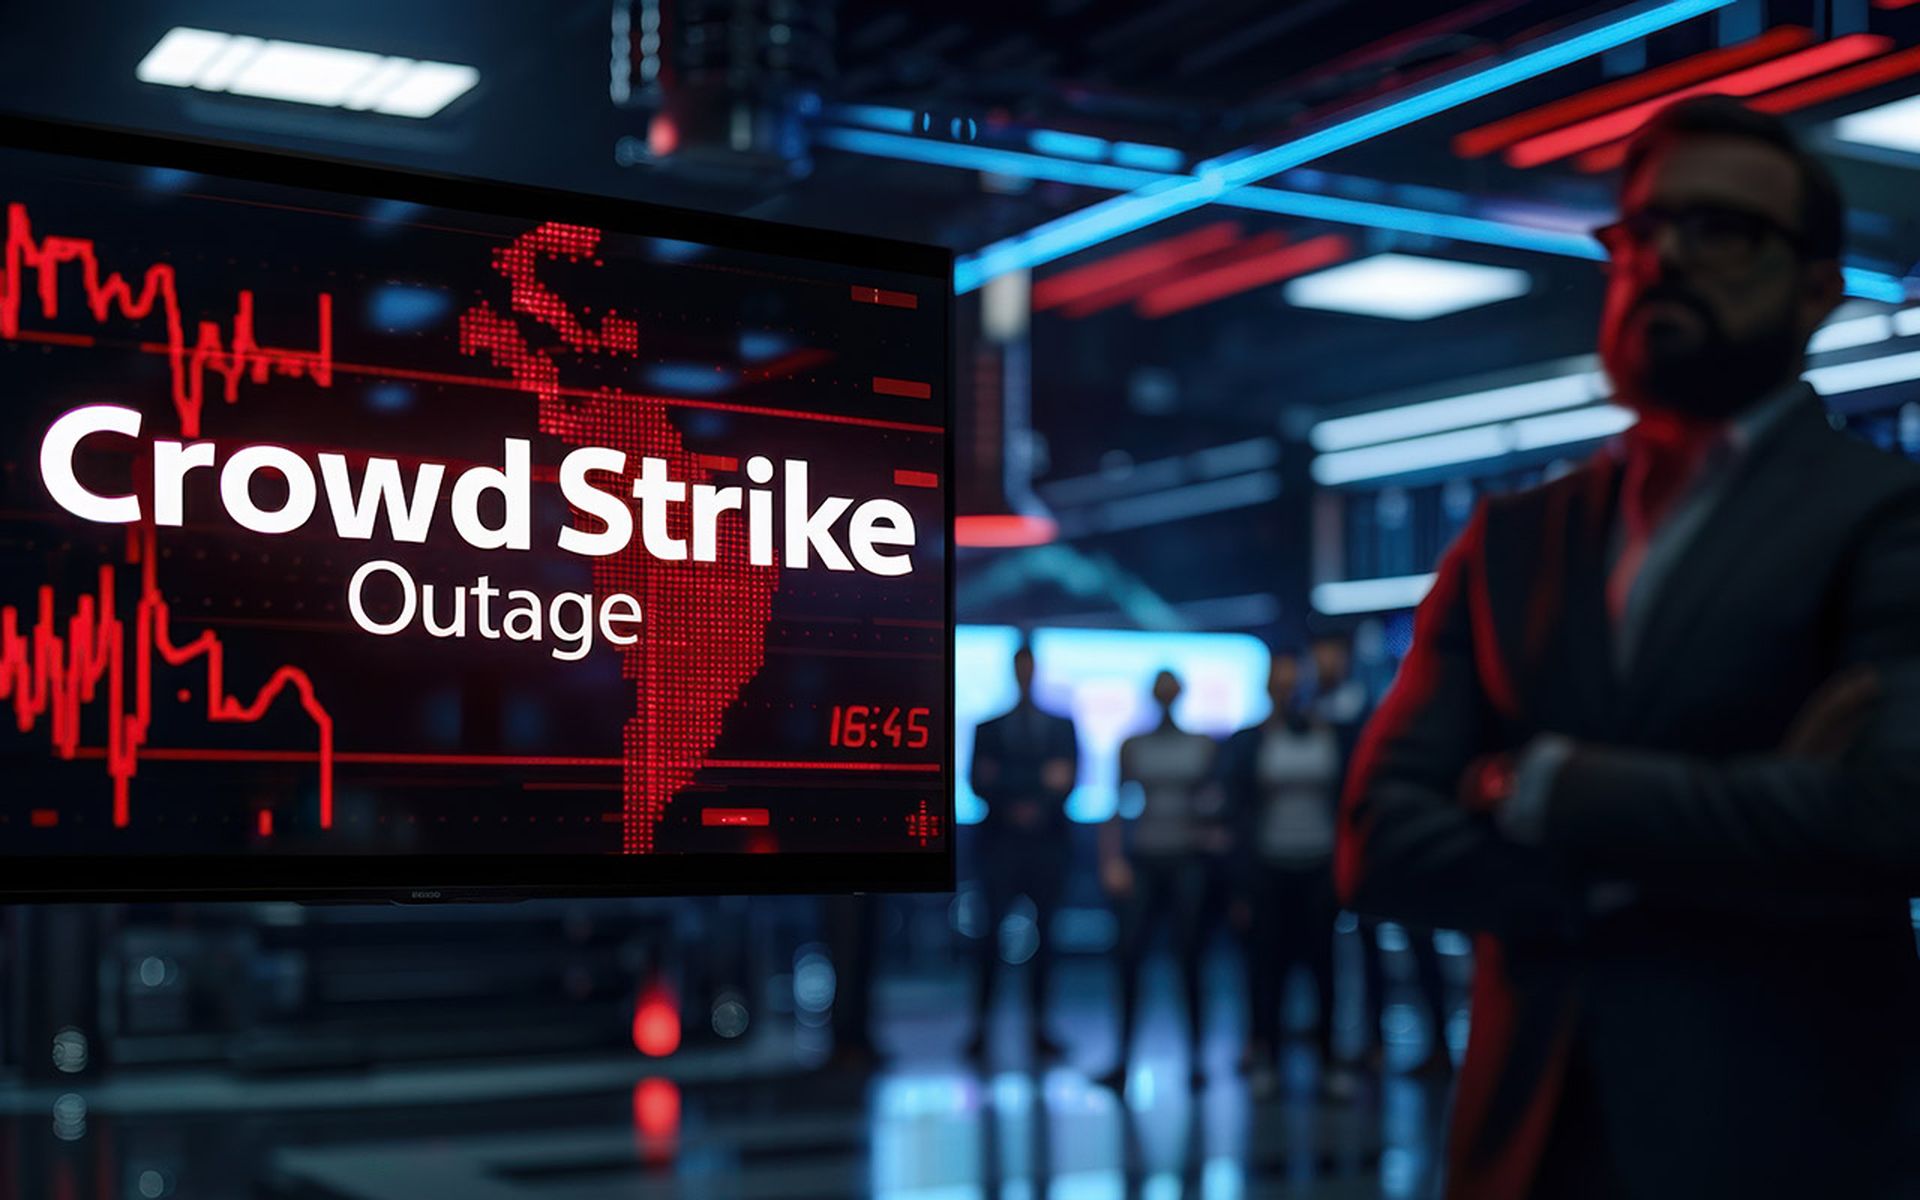 A digital display shows a CrowdStrike outage notification in a modern office environment, with professionals in the background.